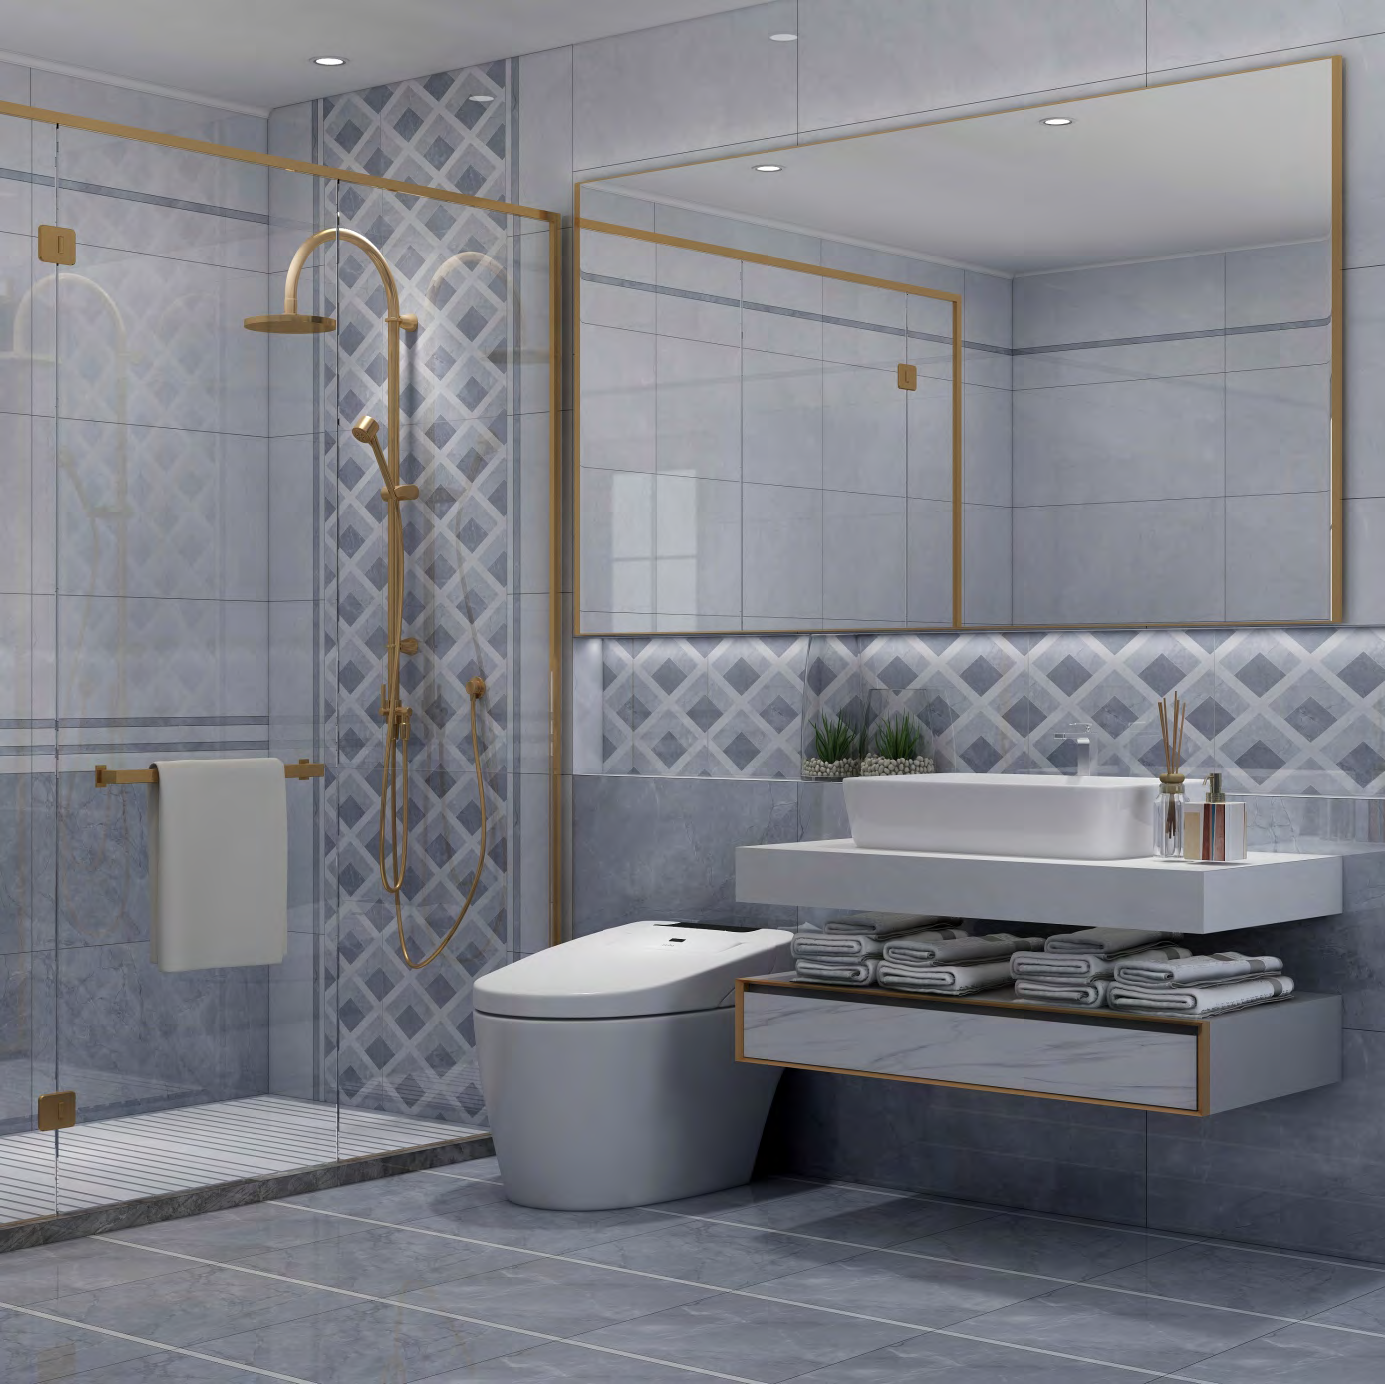 exterior wall tile manufacturers, glazed wall tiles manufacturers